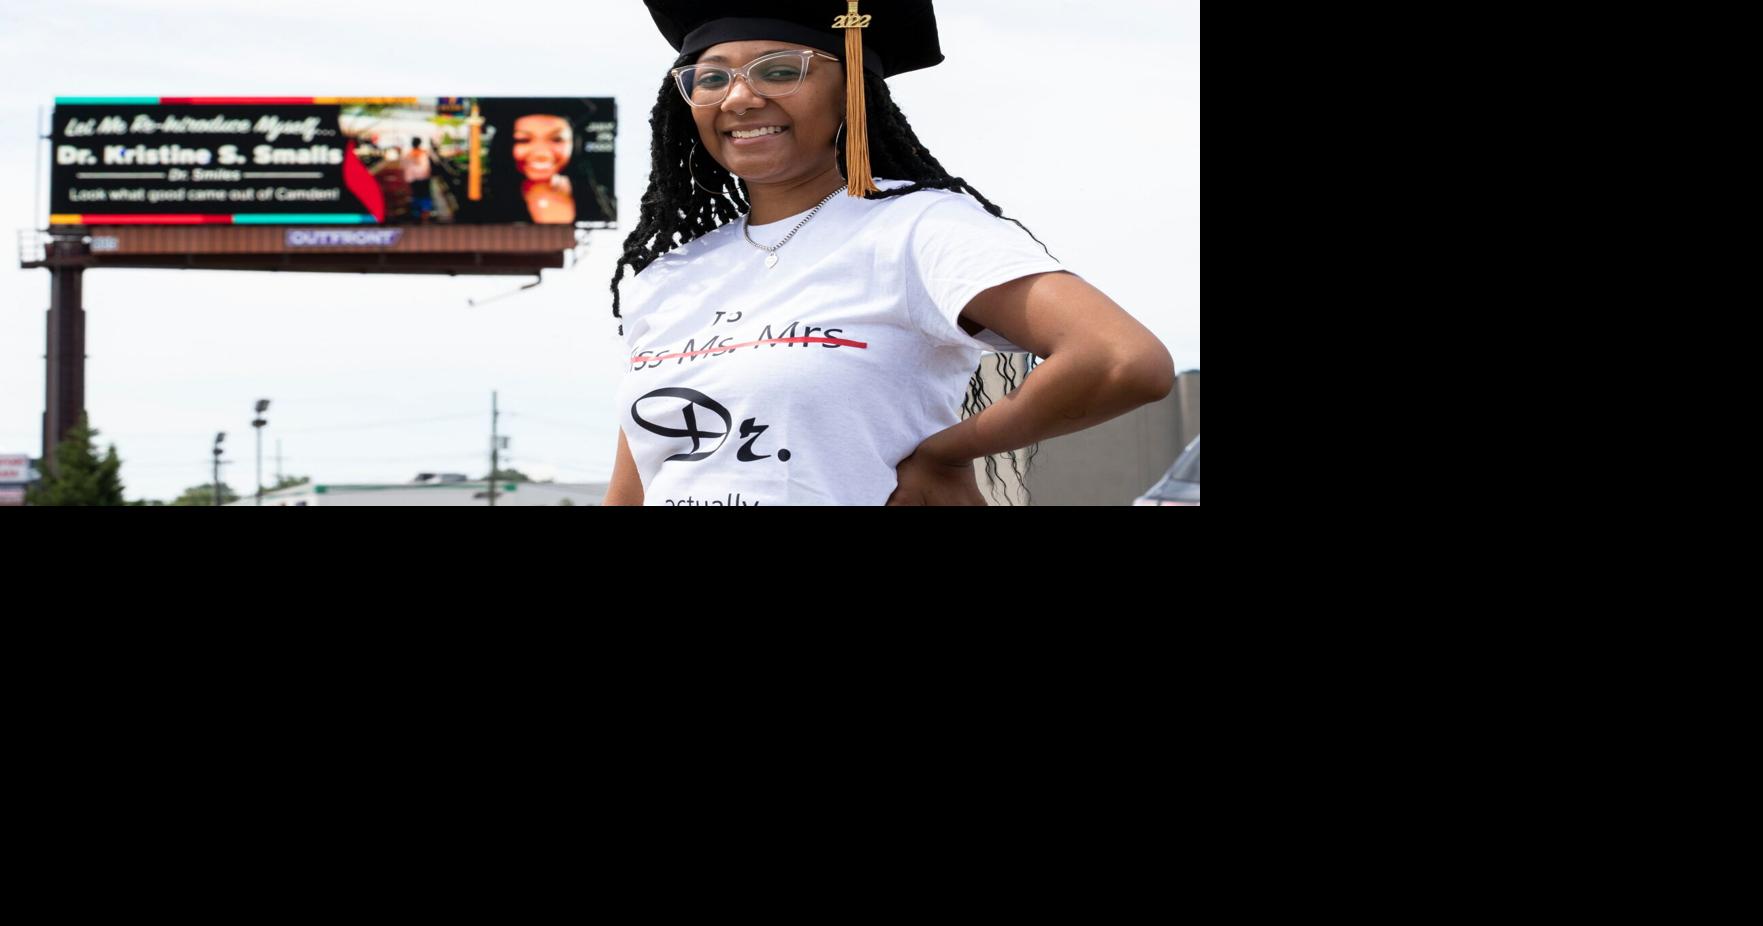 This psychologist just received her doctorate. Her mother took out a billboard to celebrate